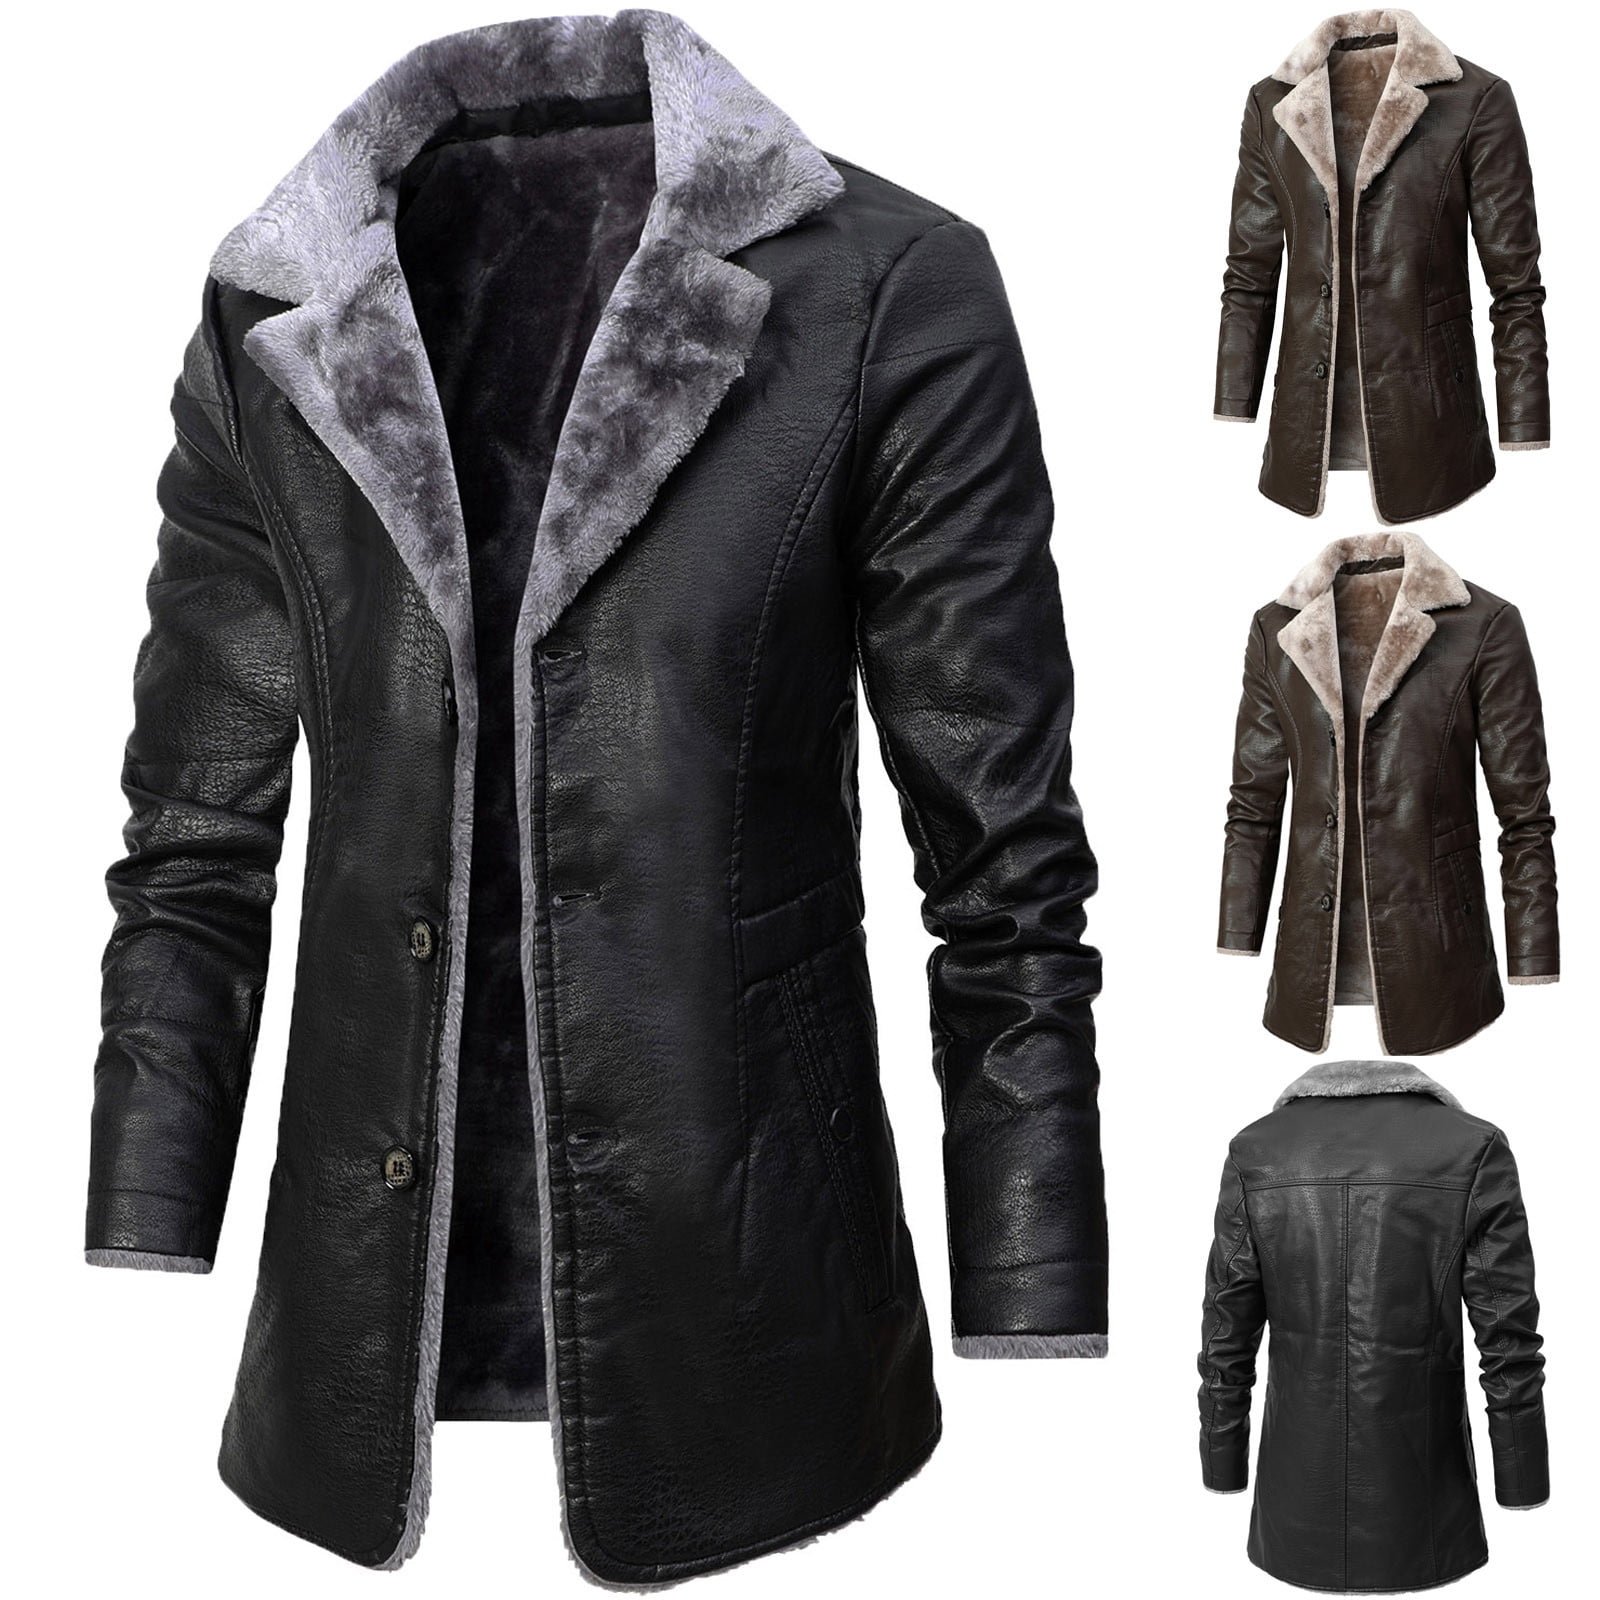 Dropship Fleece Leather Jacket Men Lining New PU Trench Coat Motorcycle  Suit Windproof Waterproof Lapel Zipper Embroidery Winter Fashion to Sell  Online at a Lower Price